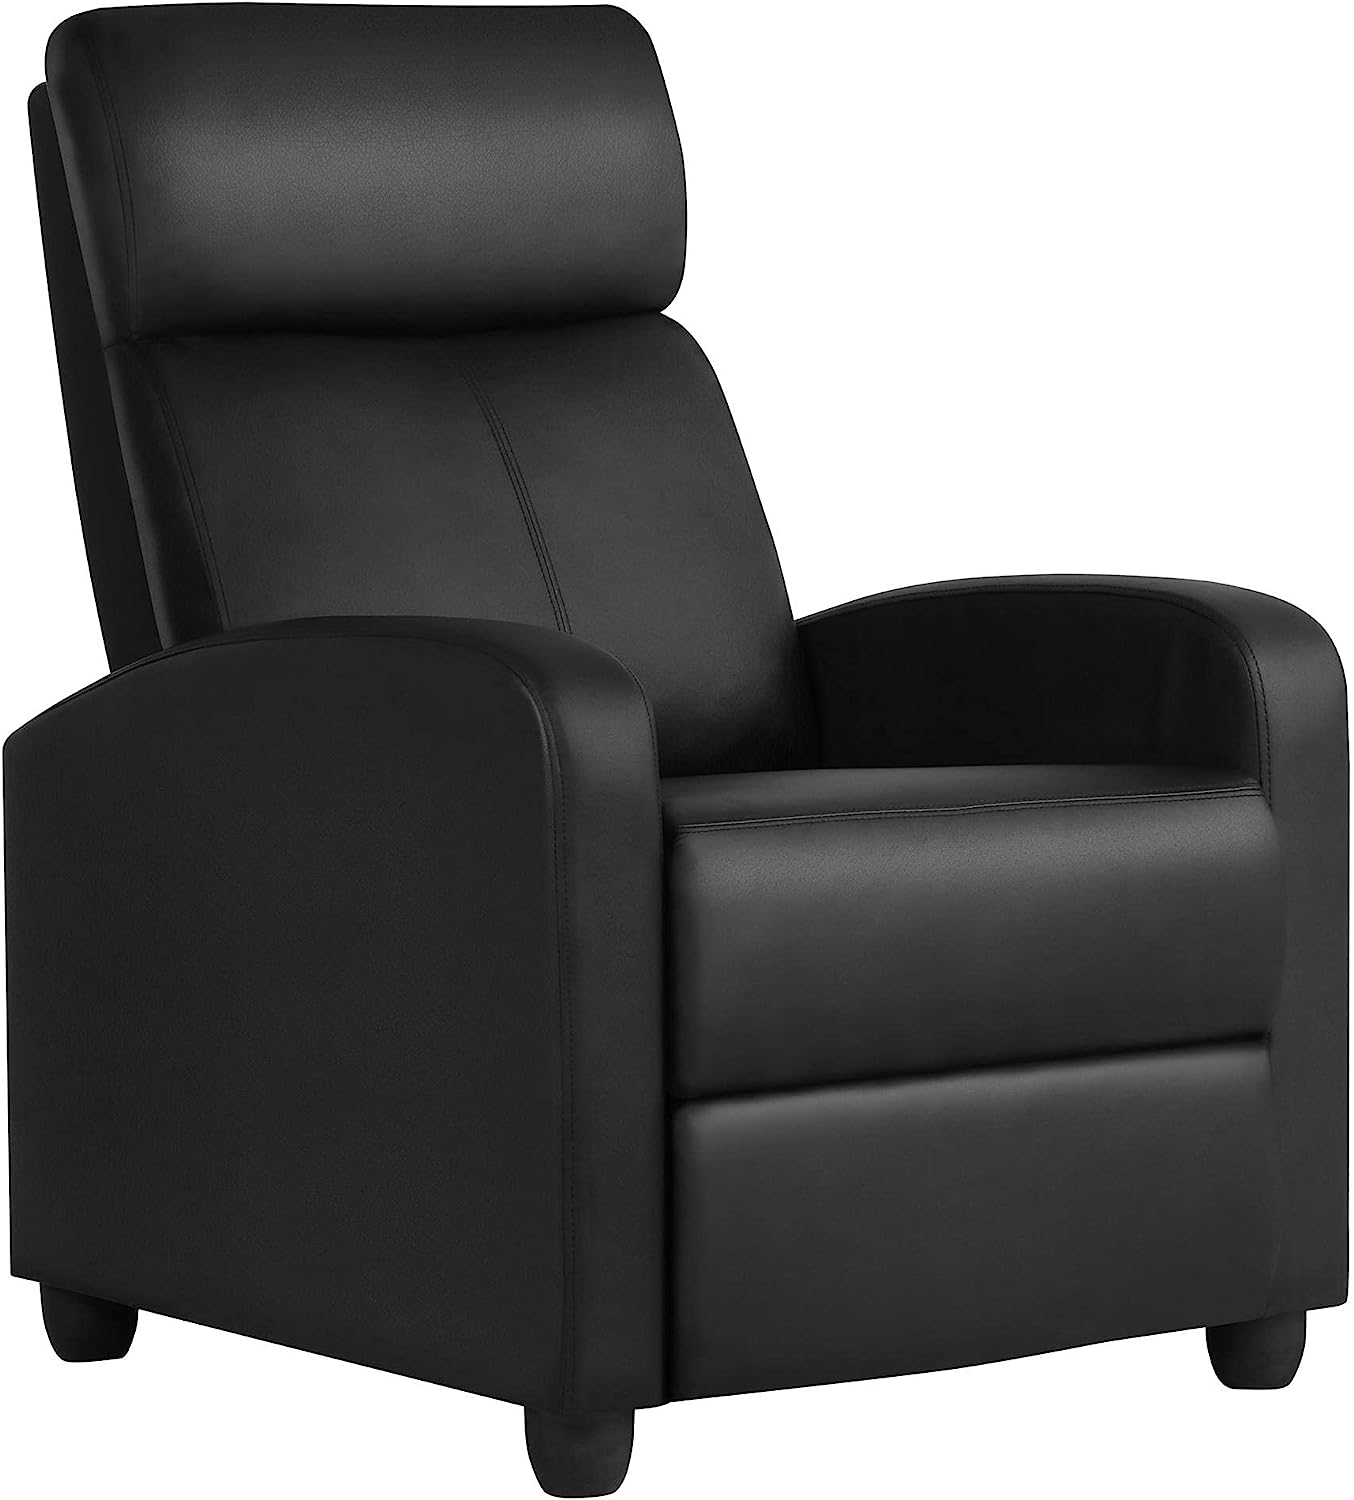 Yaheetech Recliner Chair PU Leather Recliner Sofa Home [...]